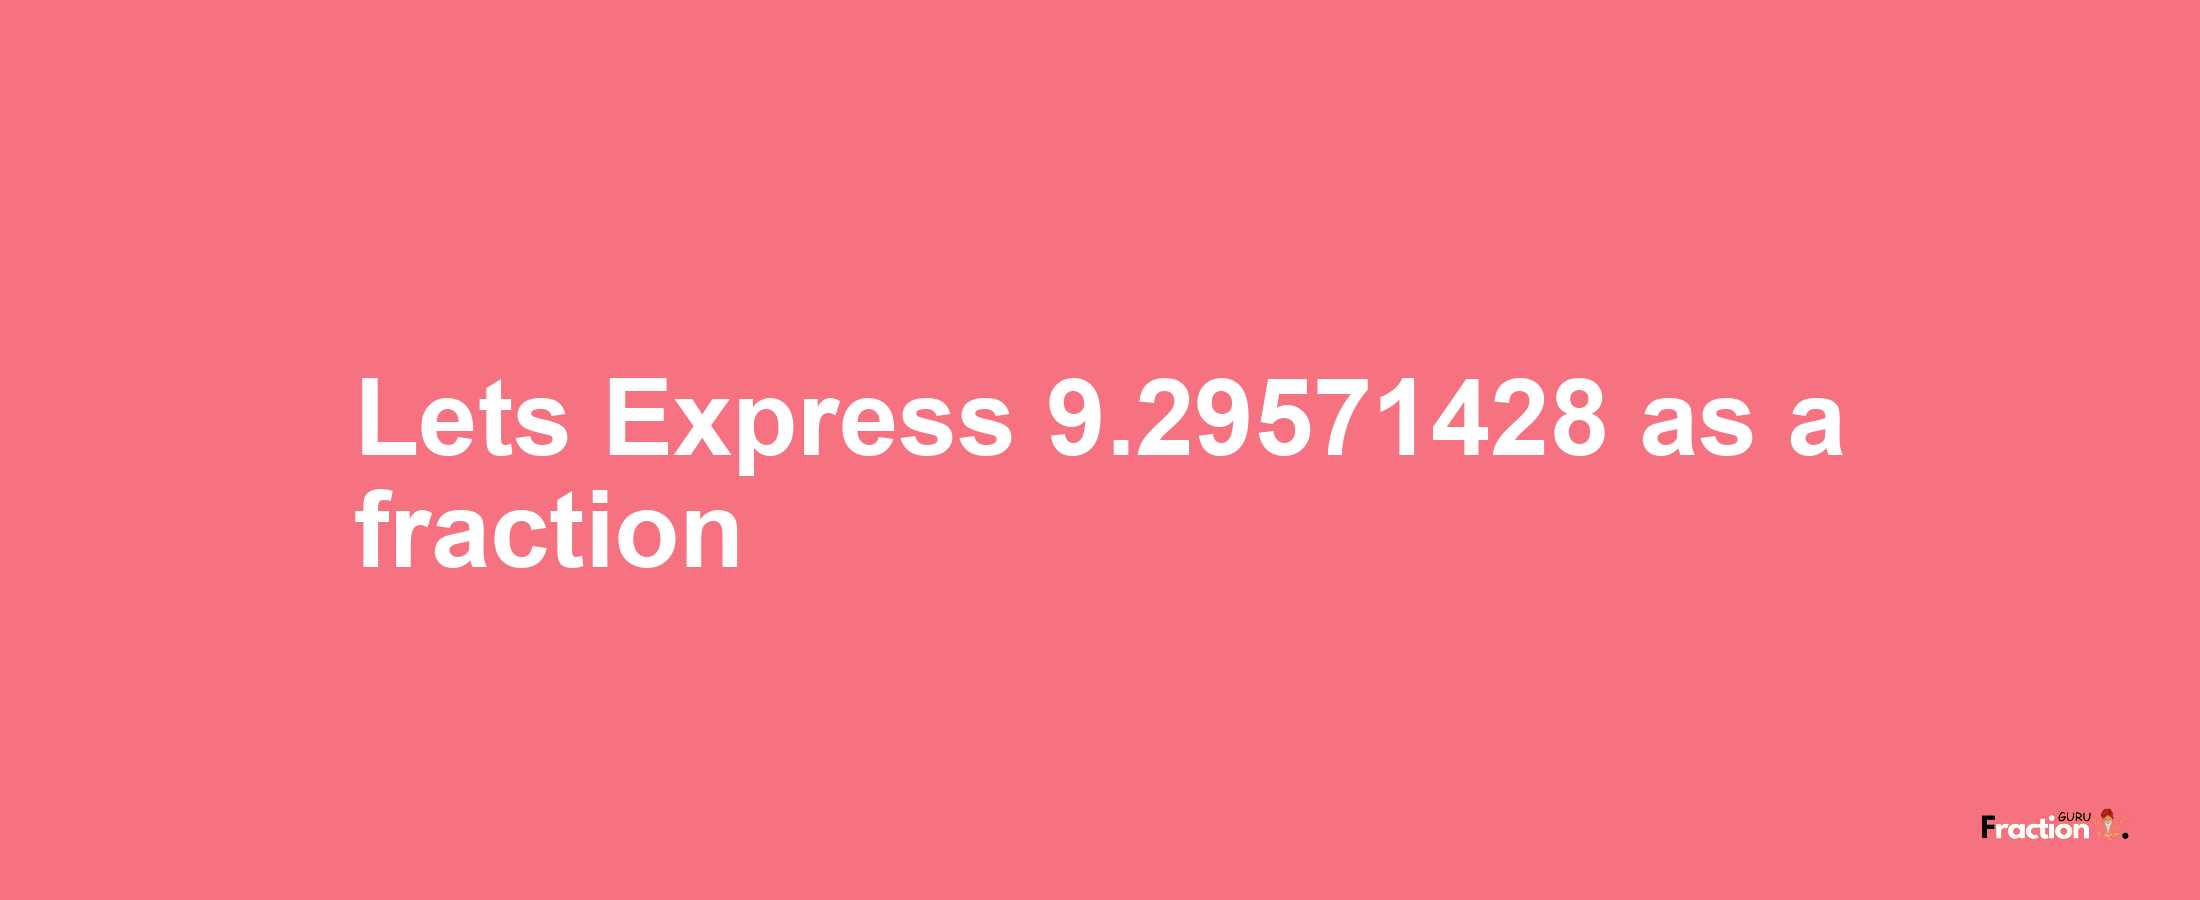 Lets Express 9.29571428 as afraction